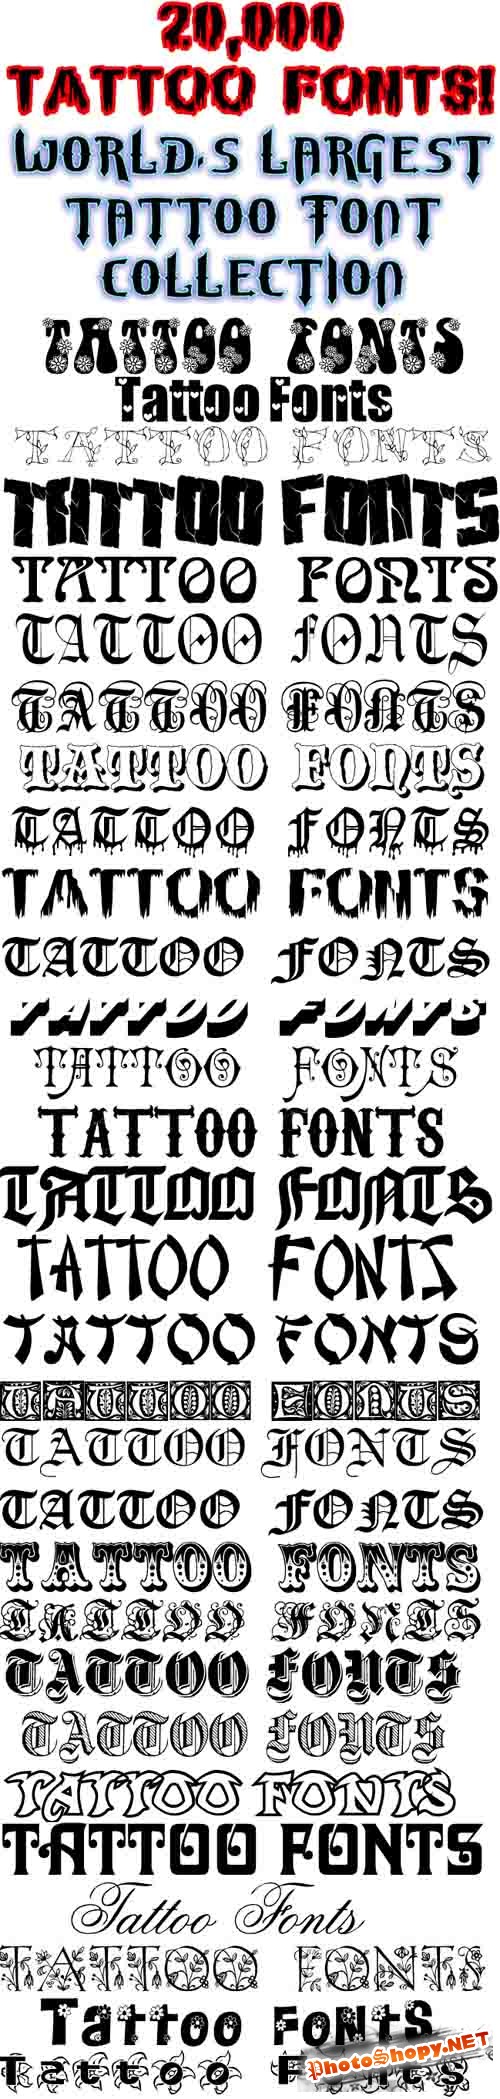 20k Tattoo Fonts Worlds Largest Collections